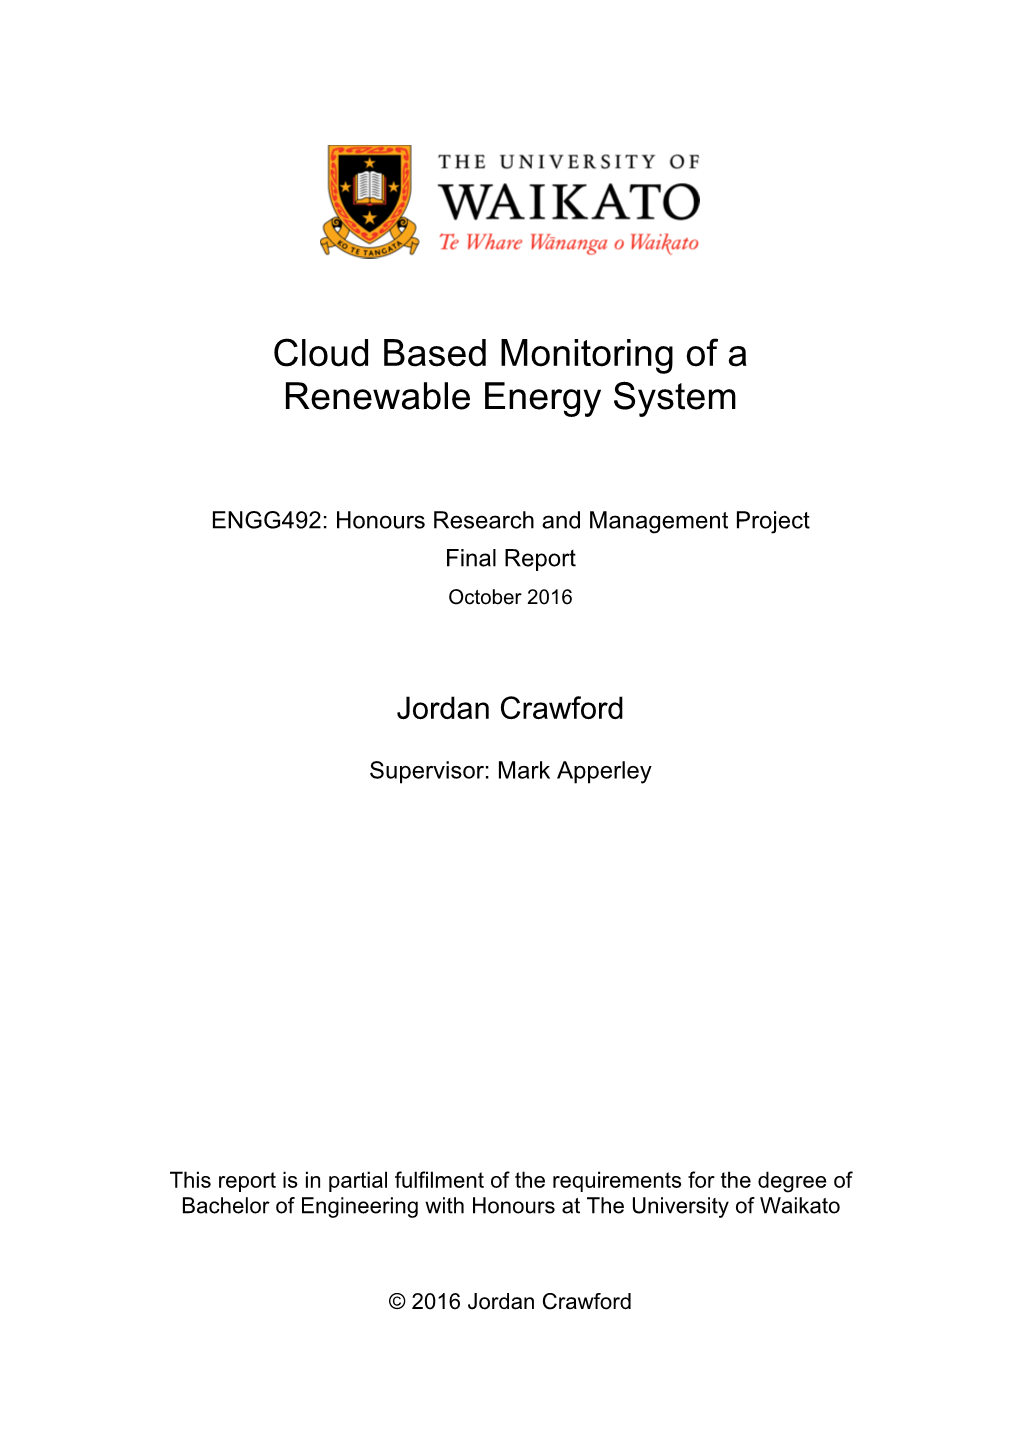 Cloud Based Monitoring of a Renewable Energy System